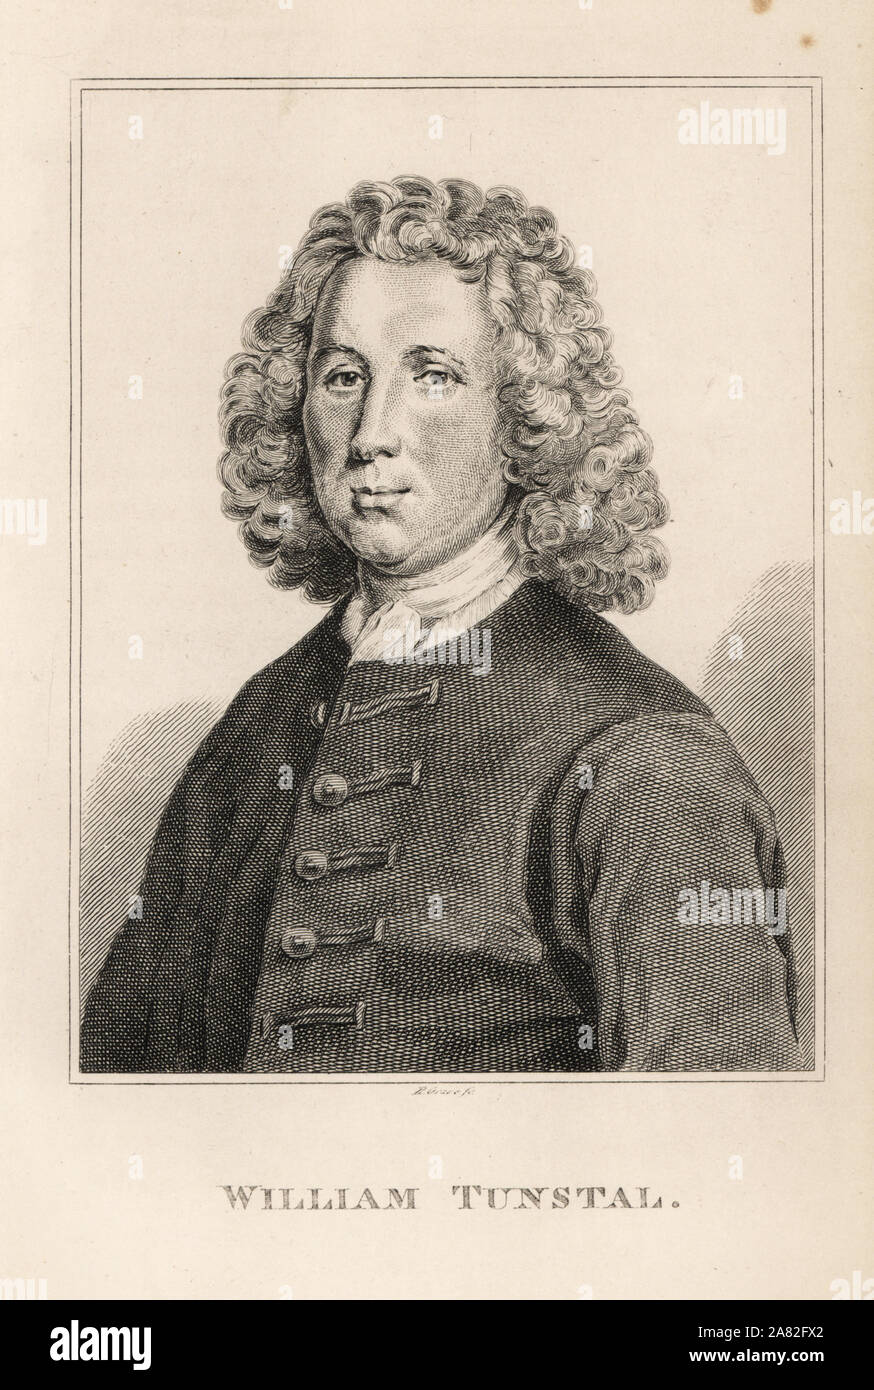 William Turnstall, poet pardoned for his support of the Stuart rebellion in 1716. Engraving by R. Grave from James Caulfield's Portraits, Memoirs and Characters of Remarkable Persons, London, 1819. Stock Photo